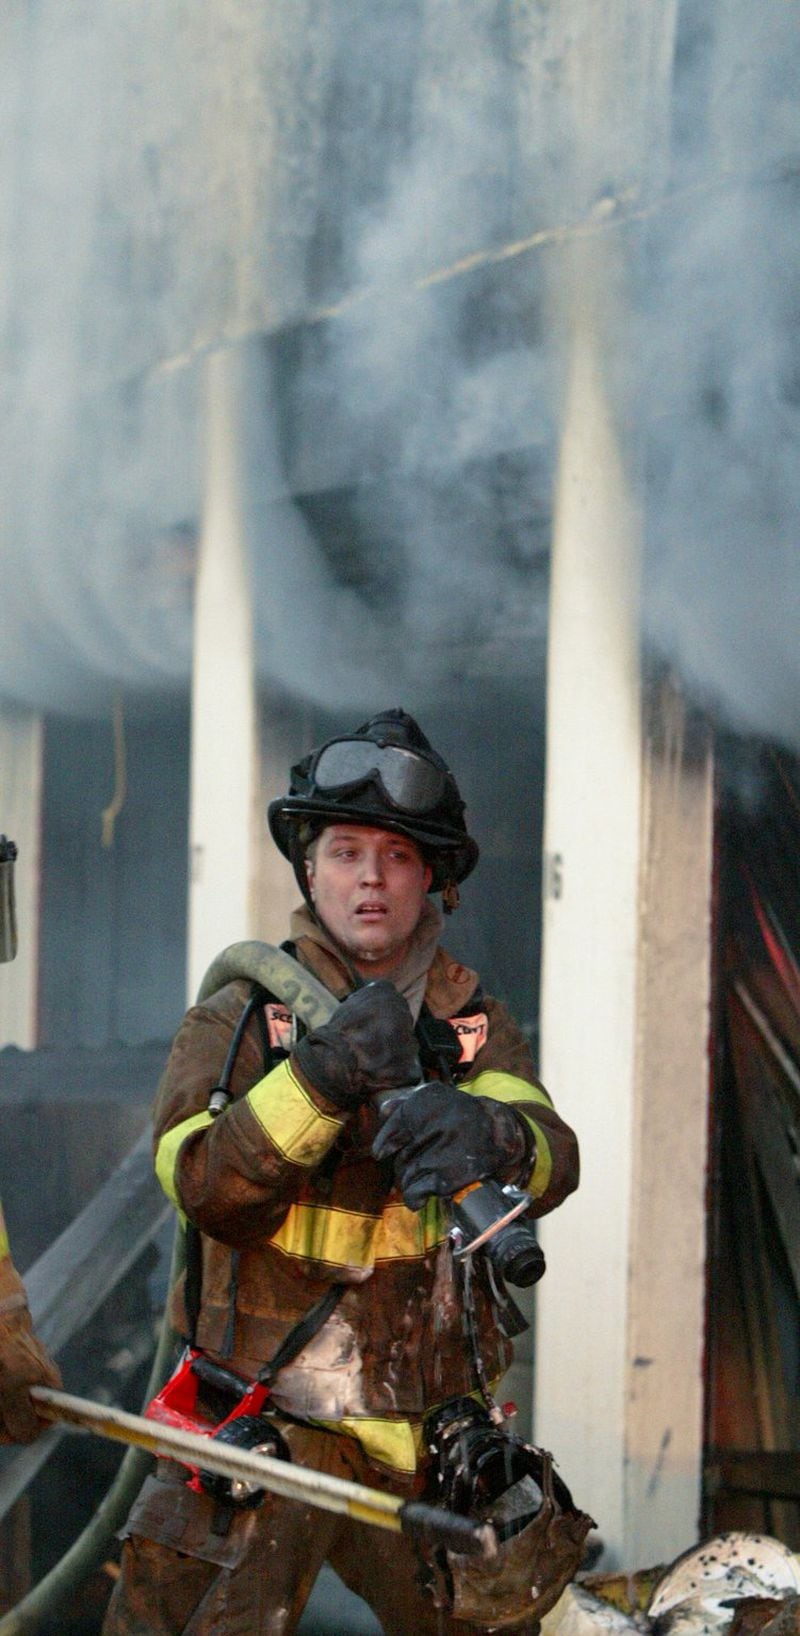 A 2004 file photo shows Chris Coons as an Atlanta firefighter hauling hose to fighting a stubborn storage facility fire in the 1300 block of Northside Drive. (JOHN SPINK/AJC staff)